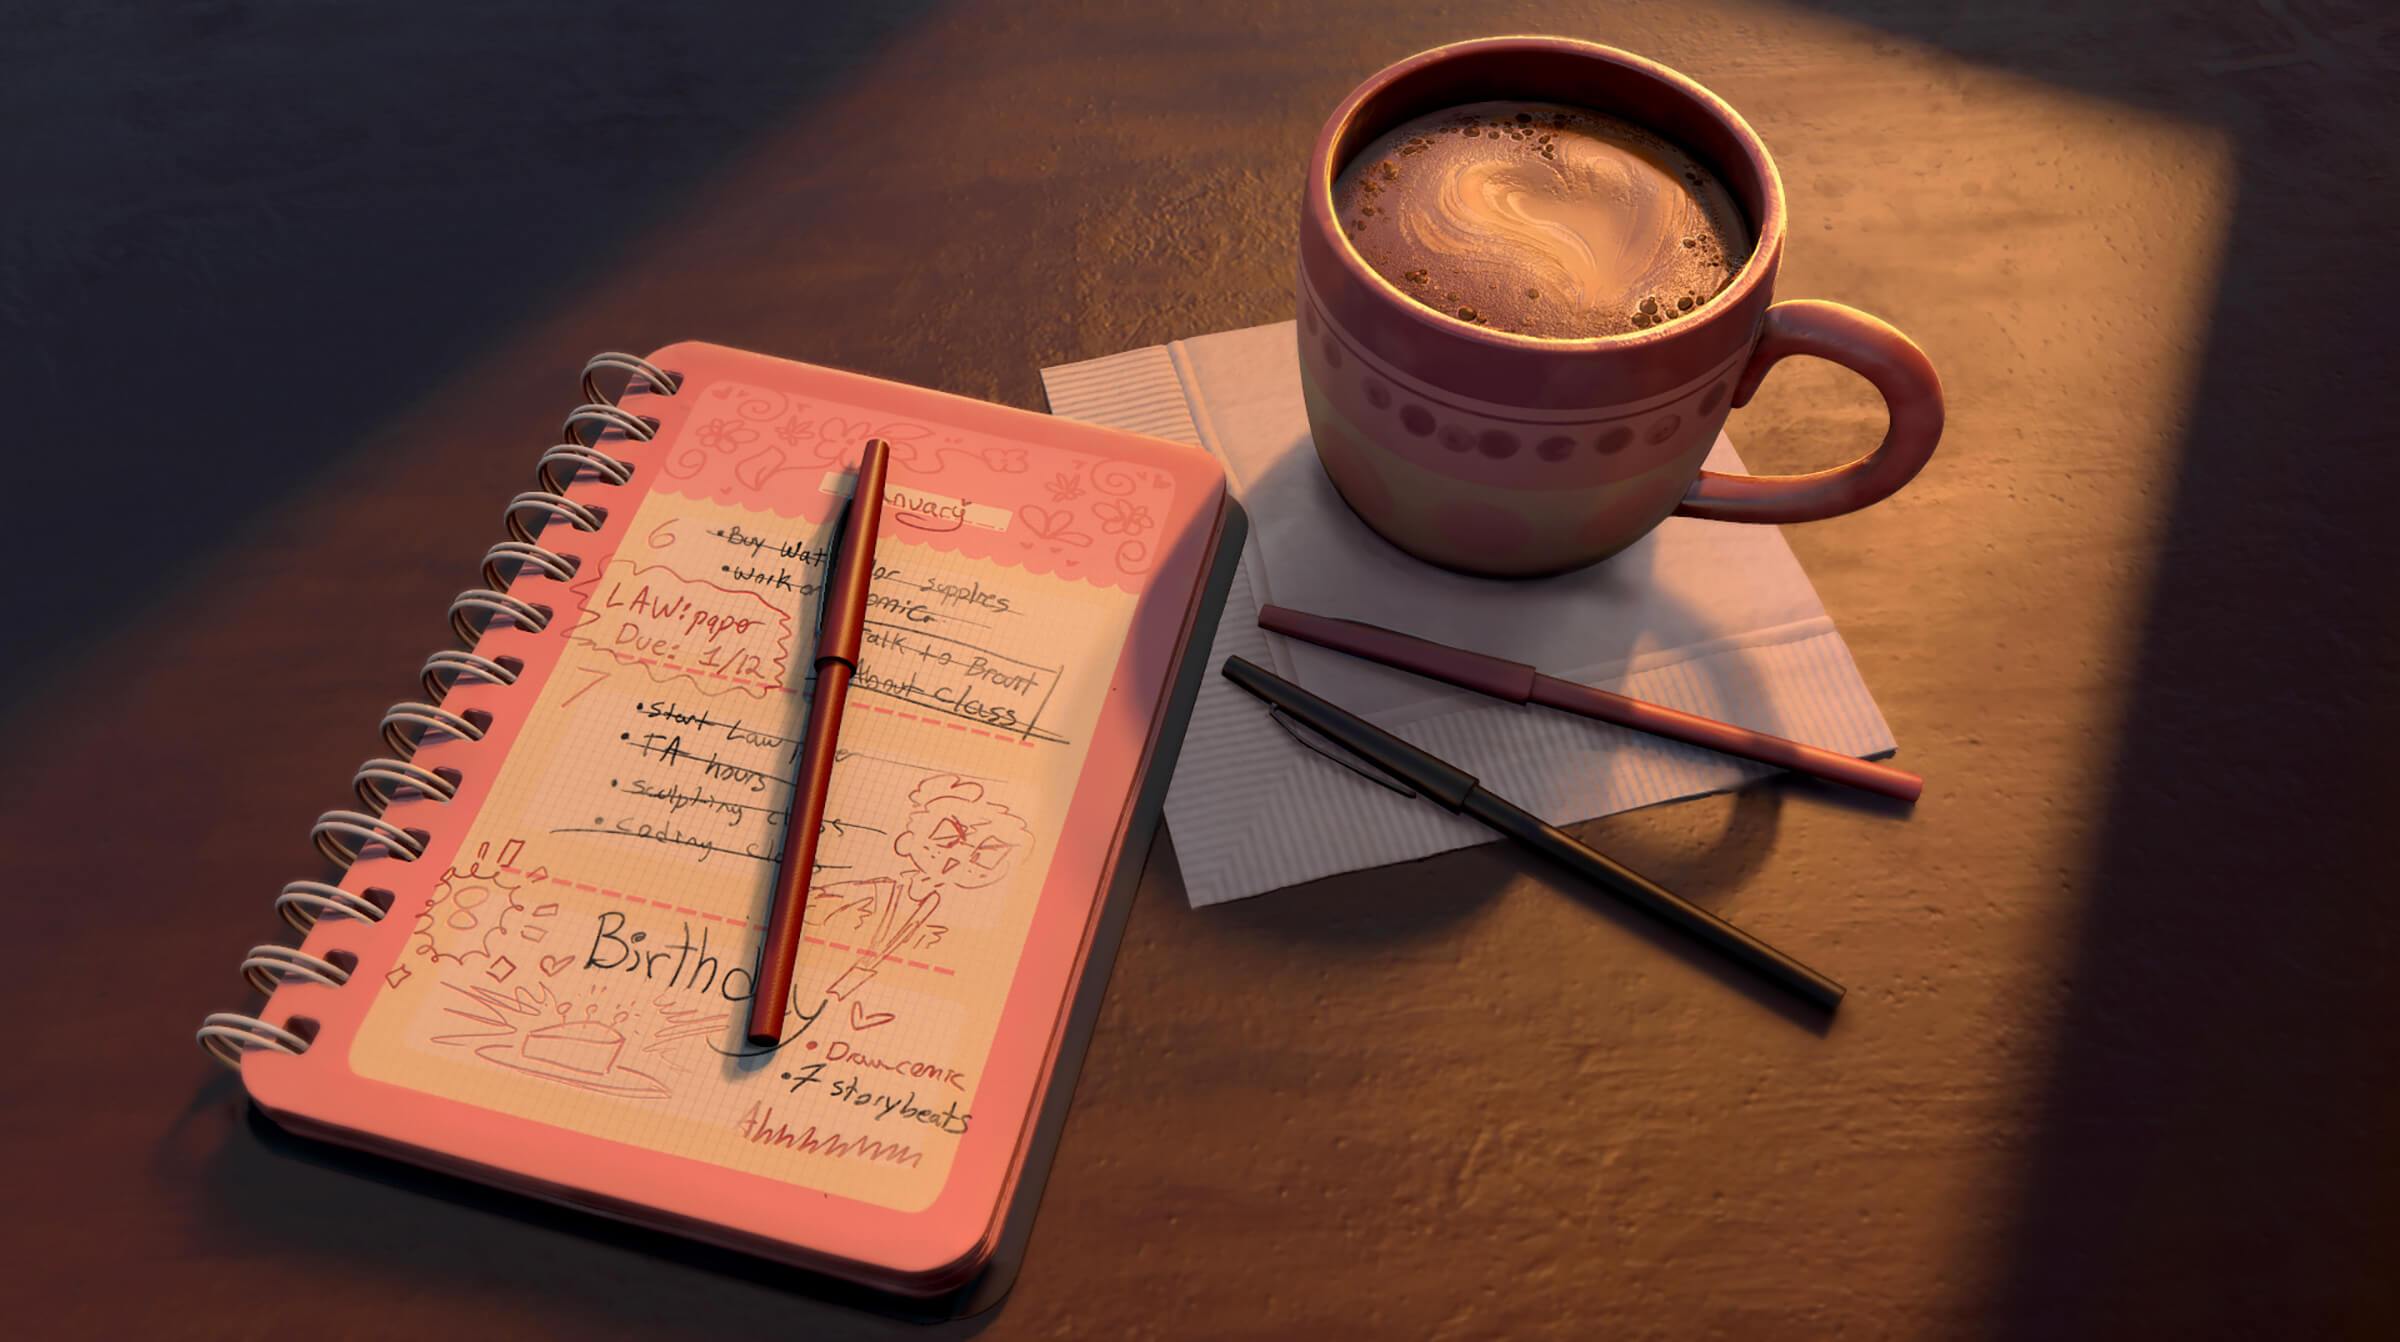 A diary and a cup of coffee